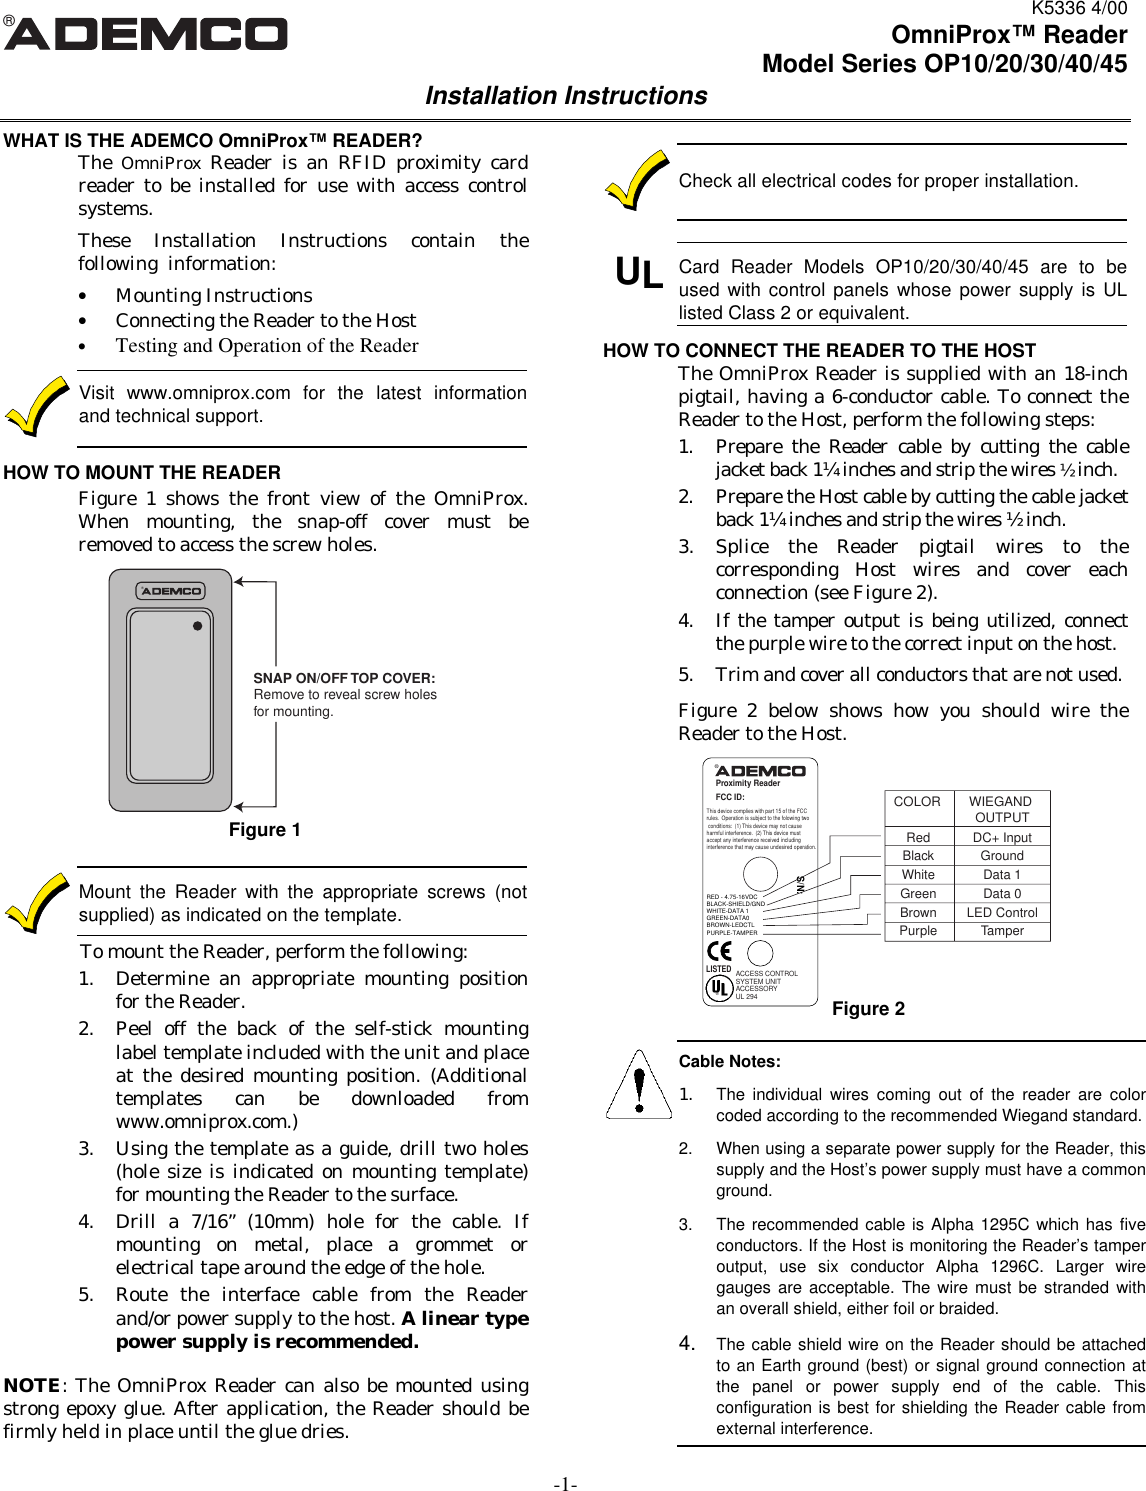 K5336 4/00-1-®OmniProx™ ReaderModel Series OP10/20/30/40/45Installation InstructionsWHAT IS THE ADEMCO OmniProx™ READER?The  OmniProx  Reader is an RFID proximity cardreader to be installed for use with access controlsystems.These Installation Instructions contain thefollowing  information:• Mounting Instructions• Connecting the Reader to the Host• Testing and Operation of the ReaderVisit www.omniprox.com for the latest informationand technical support.HOW TO MOUNT THE READERFigure 1 shows the front view of the OmniProx.When mounting, the snap-off cover must beremoved to access the screw holes.Figure 1Mount the Reader with the appropriate screws (notsupplied) as indicated on the template.To mount the Reader, perform the following:1. Determine an appropriate mounting positionfor the Reader.2. Peel off the back of the self-stick mountinglabel template included with the unit and placeat the desired mounting position. (Additionaltemplates can be downloaded fromwww.omniprox.com.)3. Using the template as a guide, drill two holes(hole size is indicated on mounting template)for mounting the Reader to the surface.4. Drill a 7/16” (10mm) hole for the cable. Ifmounting on metal, place a grommet orelectrical tape around the edge of the hole.5. Route the interface cable from the Readerand/or power supply to the host. A linear typepower supply is recommended.NOTE: The OmniProx Reader can also be mounted usingstrong epoxy glue. After application, the Reader should befirmly held in place until the glue dries.Check all electrical codes for proper installation. ULCard Reader Models OP10/20/30/40/45 are to beused with control panels whose power supply is ULlisted Class 2 or equivalent.HOW TO CONNECT THE READER TO THE HOSTThe OmniProx Reader is supplied with an 18-inchpigtail, having a 6-conductor cable. To connect theReader to the Host, perform the following steps:1. Prepare the Reader cable by cutting the cablejacket back 1¼ inches and strip the wires ½ inch.2. Prepare the Host cable by cutting the cable jacketback 1¼ inches and strip the wires ½ inch.3. Splice the Reader pigtail wires to thecorresponding Host wires and cover eachconnection (see Figure 2).4. If the tamper output is being utilized, connectthe purple wire to the correct input on the host.5. Trim and cover all conductors that are not used.Figure 2 below shows how you should wire theReader to the Host.®Proximity ReaderFCC ID:This device complies with part 15 of the FCCrules.  Operation is subject to the folowing two conditions:  (1) This device may not cause harmful interference.  (2) This device must accept any interference received including interference that may cause undesired operation.®LISTEDACCESS CONTROLSYSTEM UNITACCESSORYUL 294S/N:COLOR WIEGAND OUTPUTRed DC+ InputBlack GroundWhite Data 1Green Data 0Brown LED ControlPurple TamperRED - 4.75-16VDCBLACK-SHIELD/GNDWHITE-DATA 1GREEN-DATA0BROWN-LEDCTLPURPLE-TAMPERCable Notes:1. The individual wires coming out of the reader are colorcoded according to the recommended Wiegand standard.2. When using a separate power supply for the Reader, thissupply and the Host’s power supply must have a commonground.3. The recommended cable is Alpha 1295C which has fiveconductors. If the Host is monitoring the Reader’s tamperoutput, use six conductor Alpha 1296C. Larger wiregauges are acceptable. The wire must be stranded withan overall shield, either foil or braided.4. The cable shield wire on the Reader should be attachedto an Earth ground (best) or signal ground connection atthe panel or power supply end of the cable. Thisconfiguration is best for shielding the Reader cable fromexternal interference.Figure 2®SNAP ON/OFF TOP COVER:Remove to reveal screw holesfor mounting.